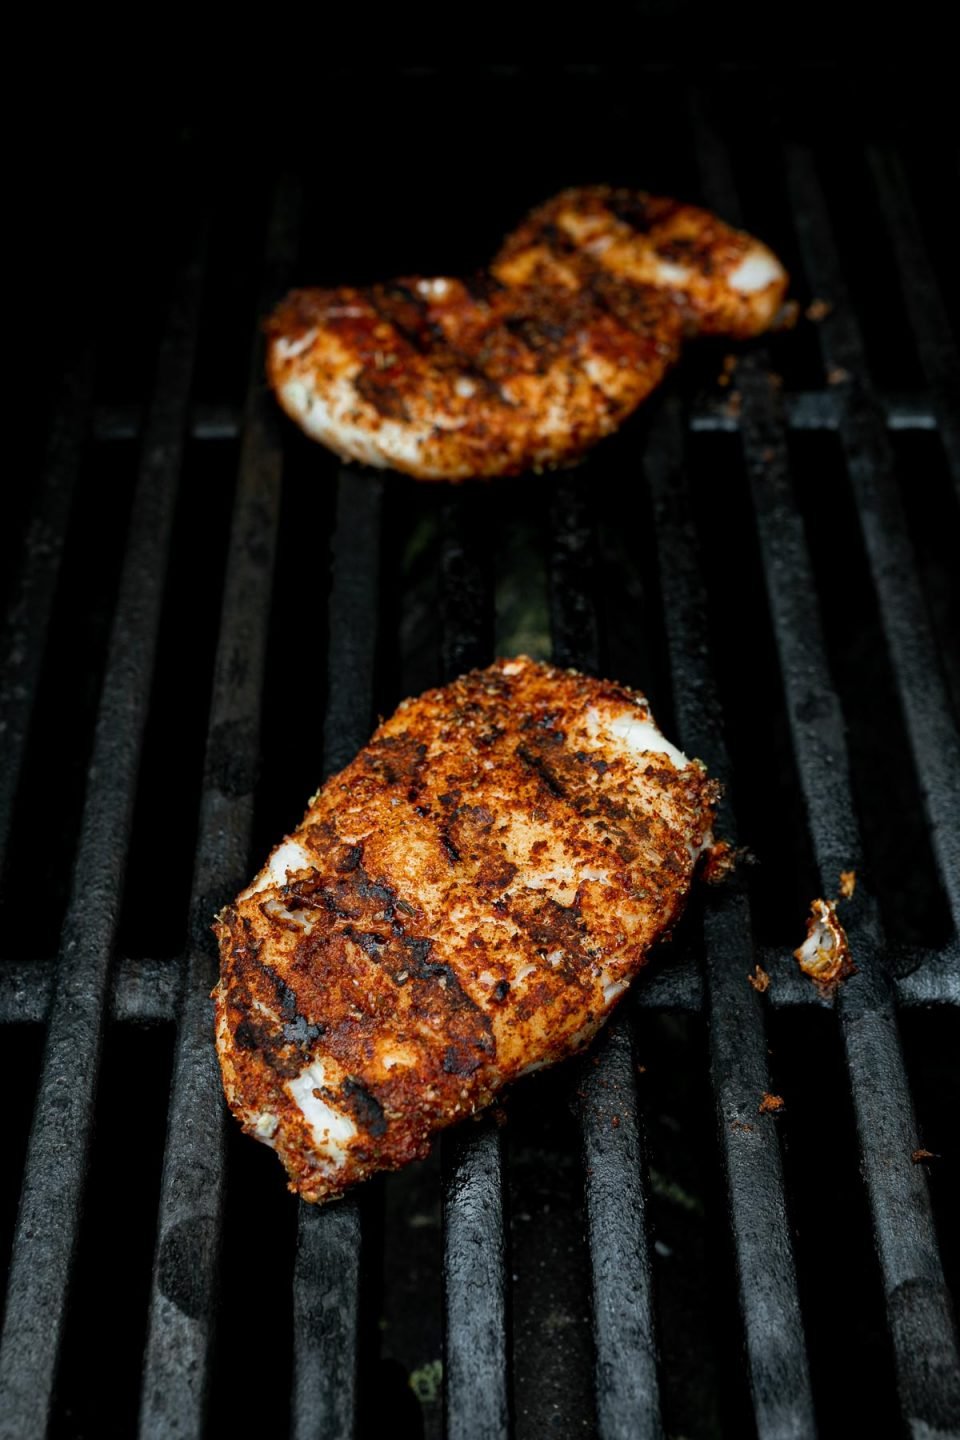 Seasoned cod fillets shown on grill grates, grilling for grilled fish tacos.